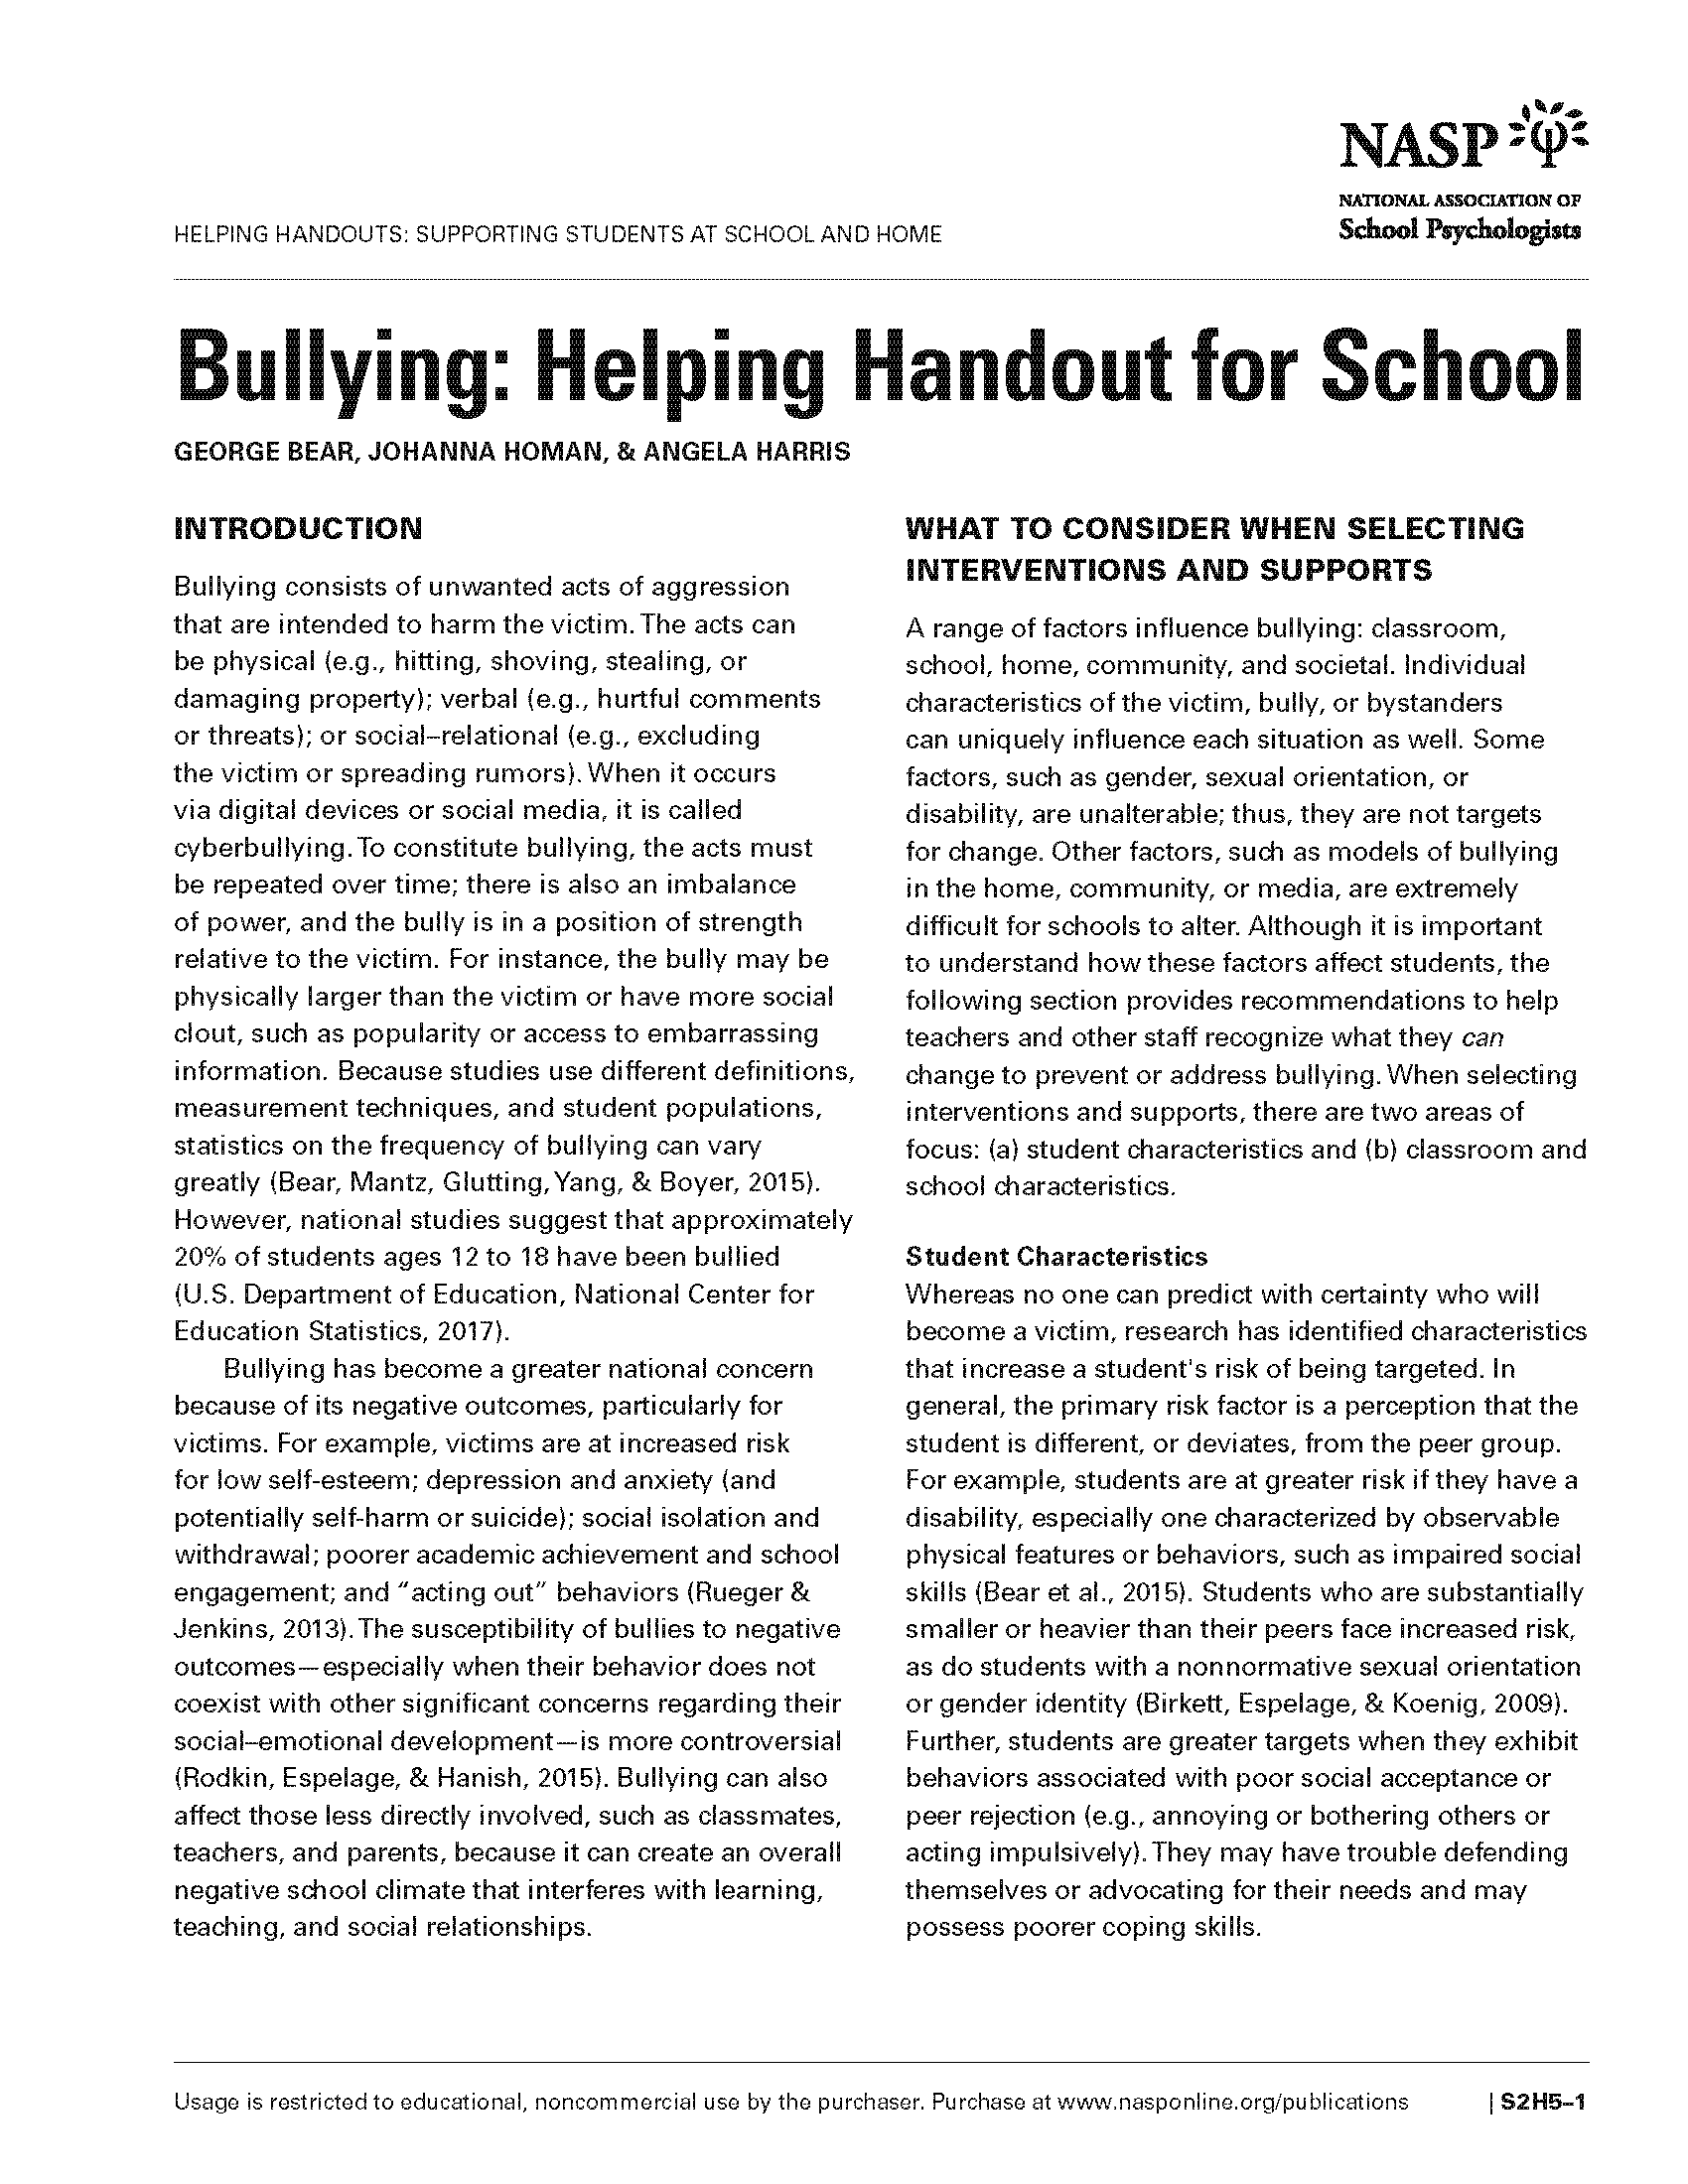 Bullying: Helping Handout for School